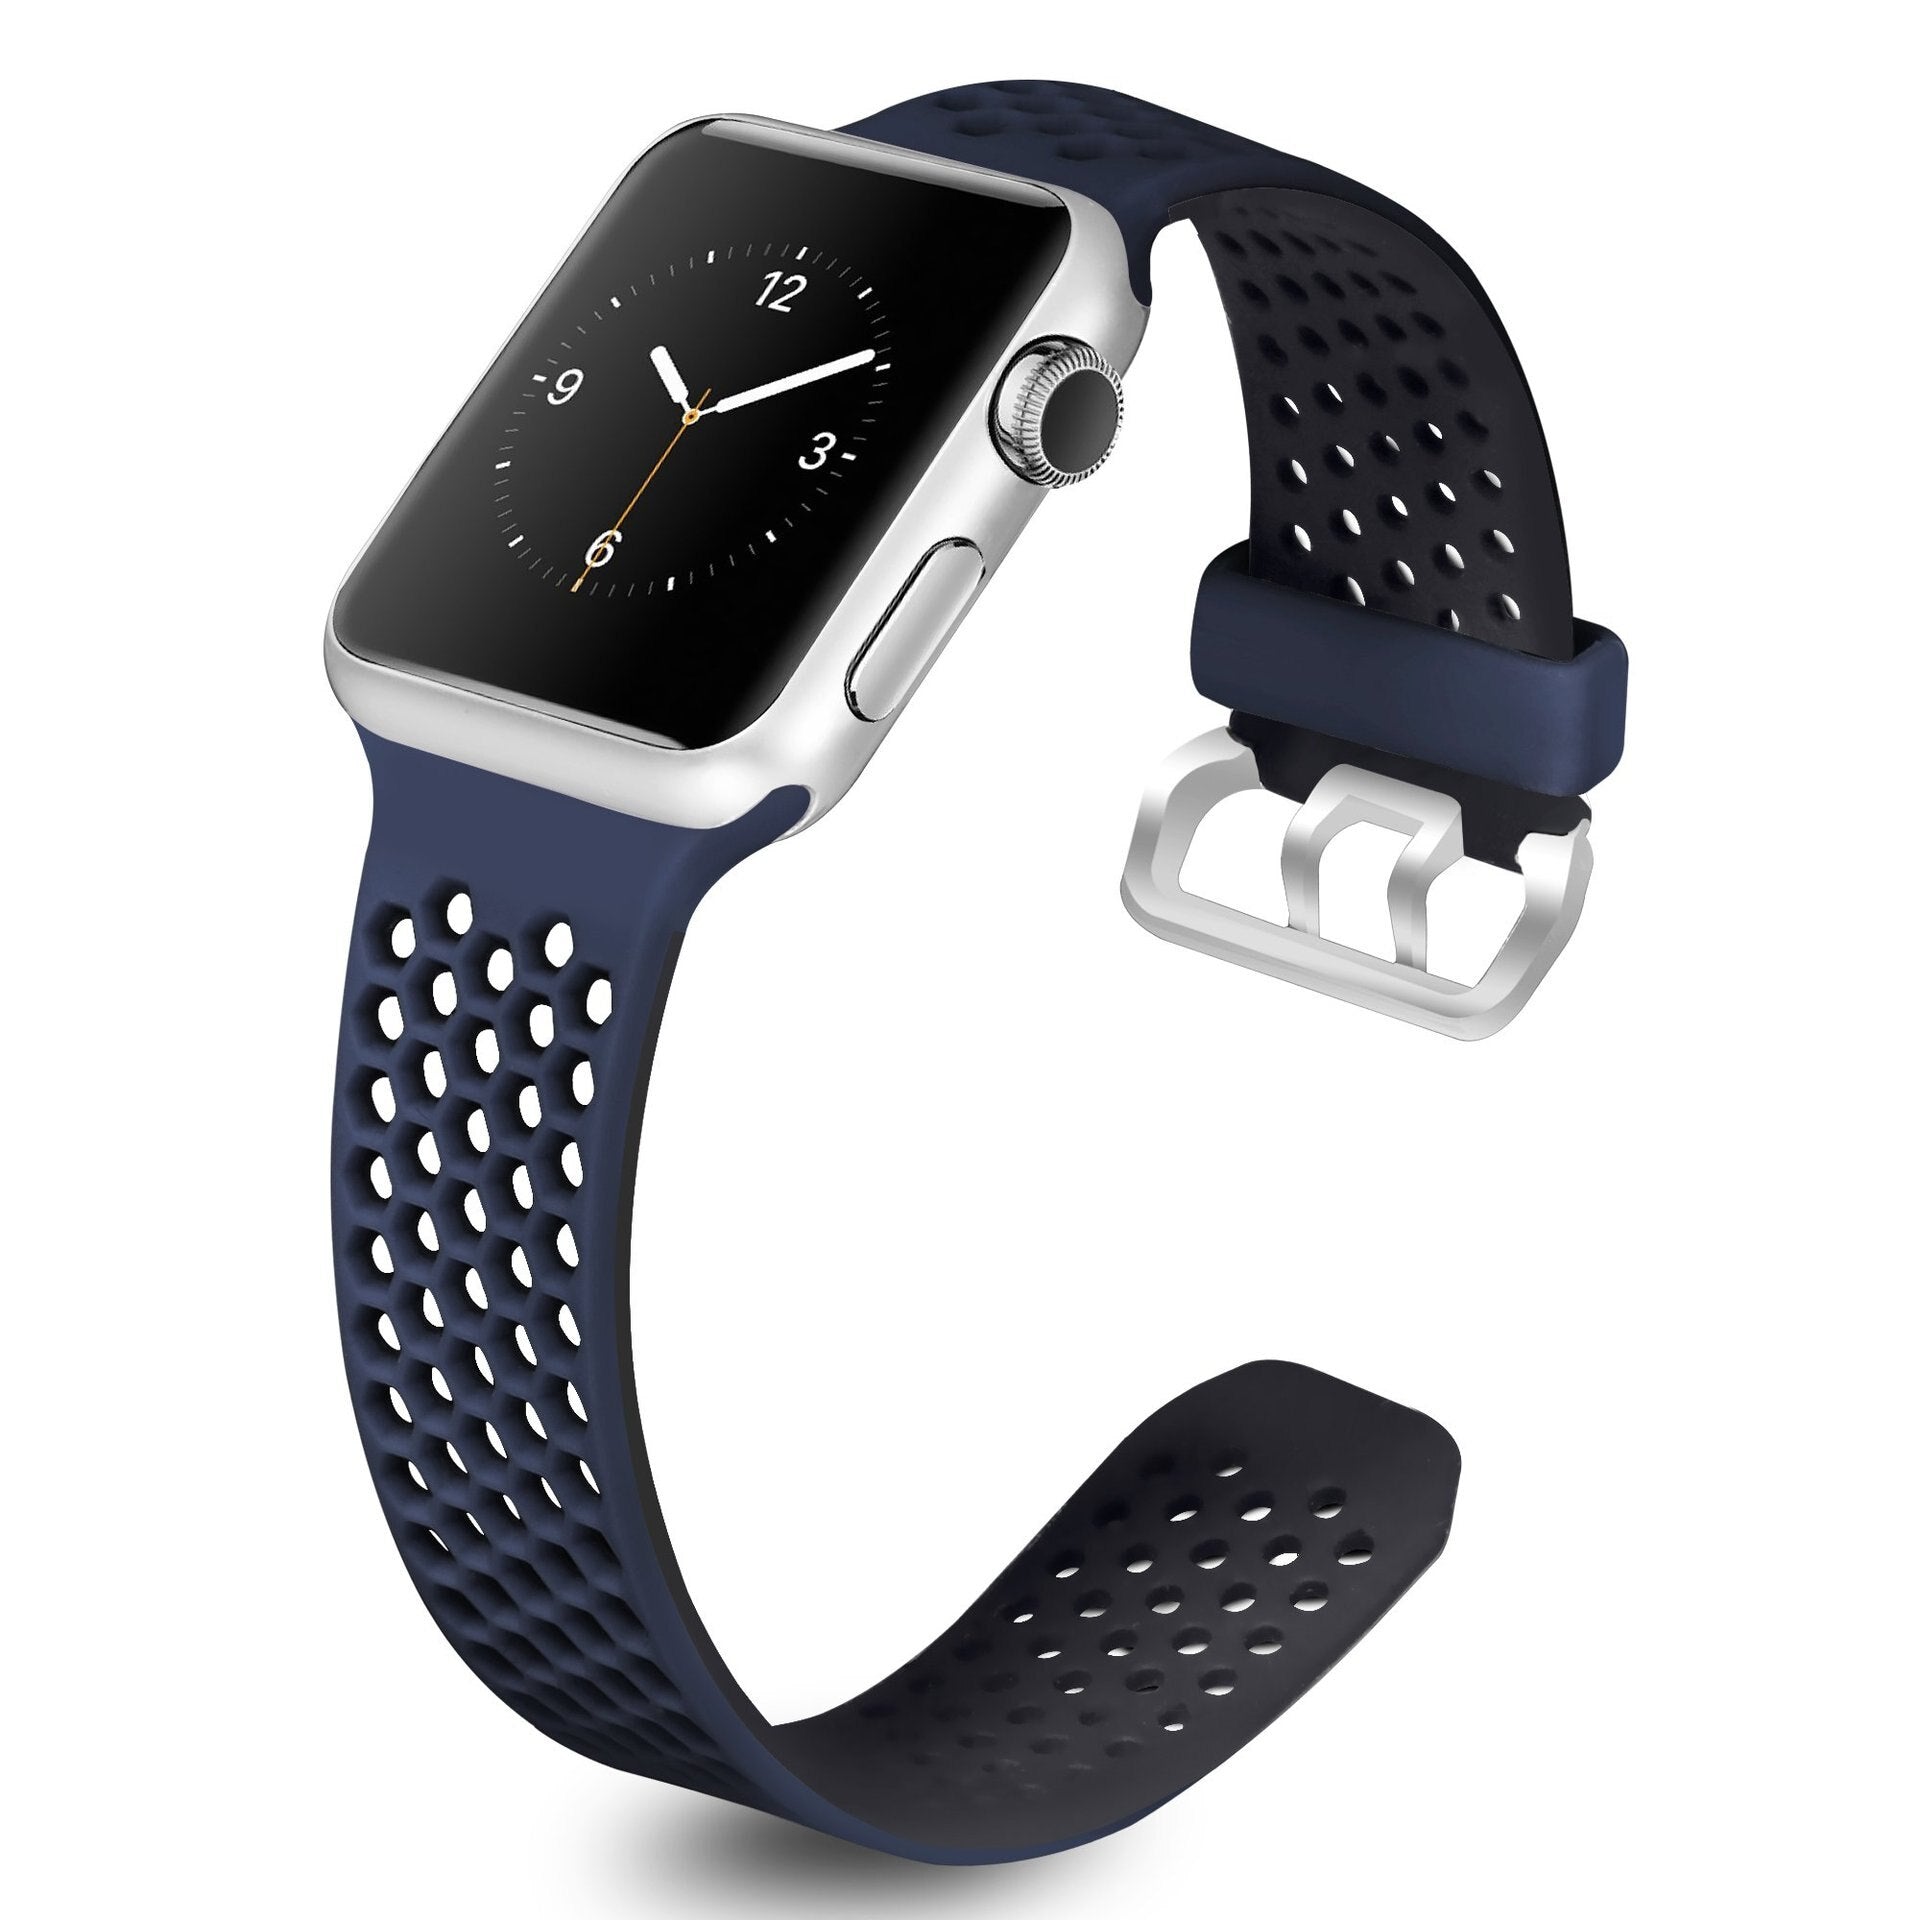 Strap for Apple Watch 5 Band 40mm 44mm iWatch series 4 5 6 SE Sport Belt Silicone bracelet for Apple watch band 42mm 38mm - 200000127 United States / blue / 38 or 40 mm Find Epic Store